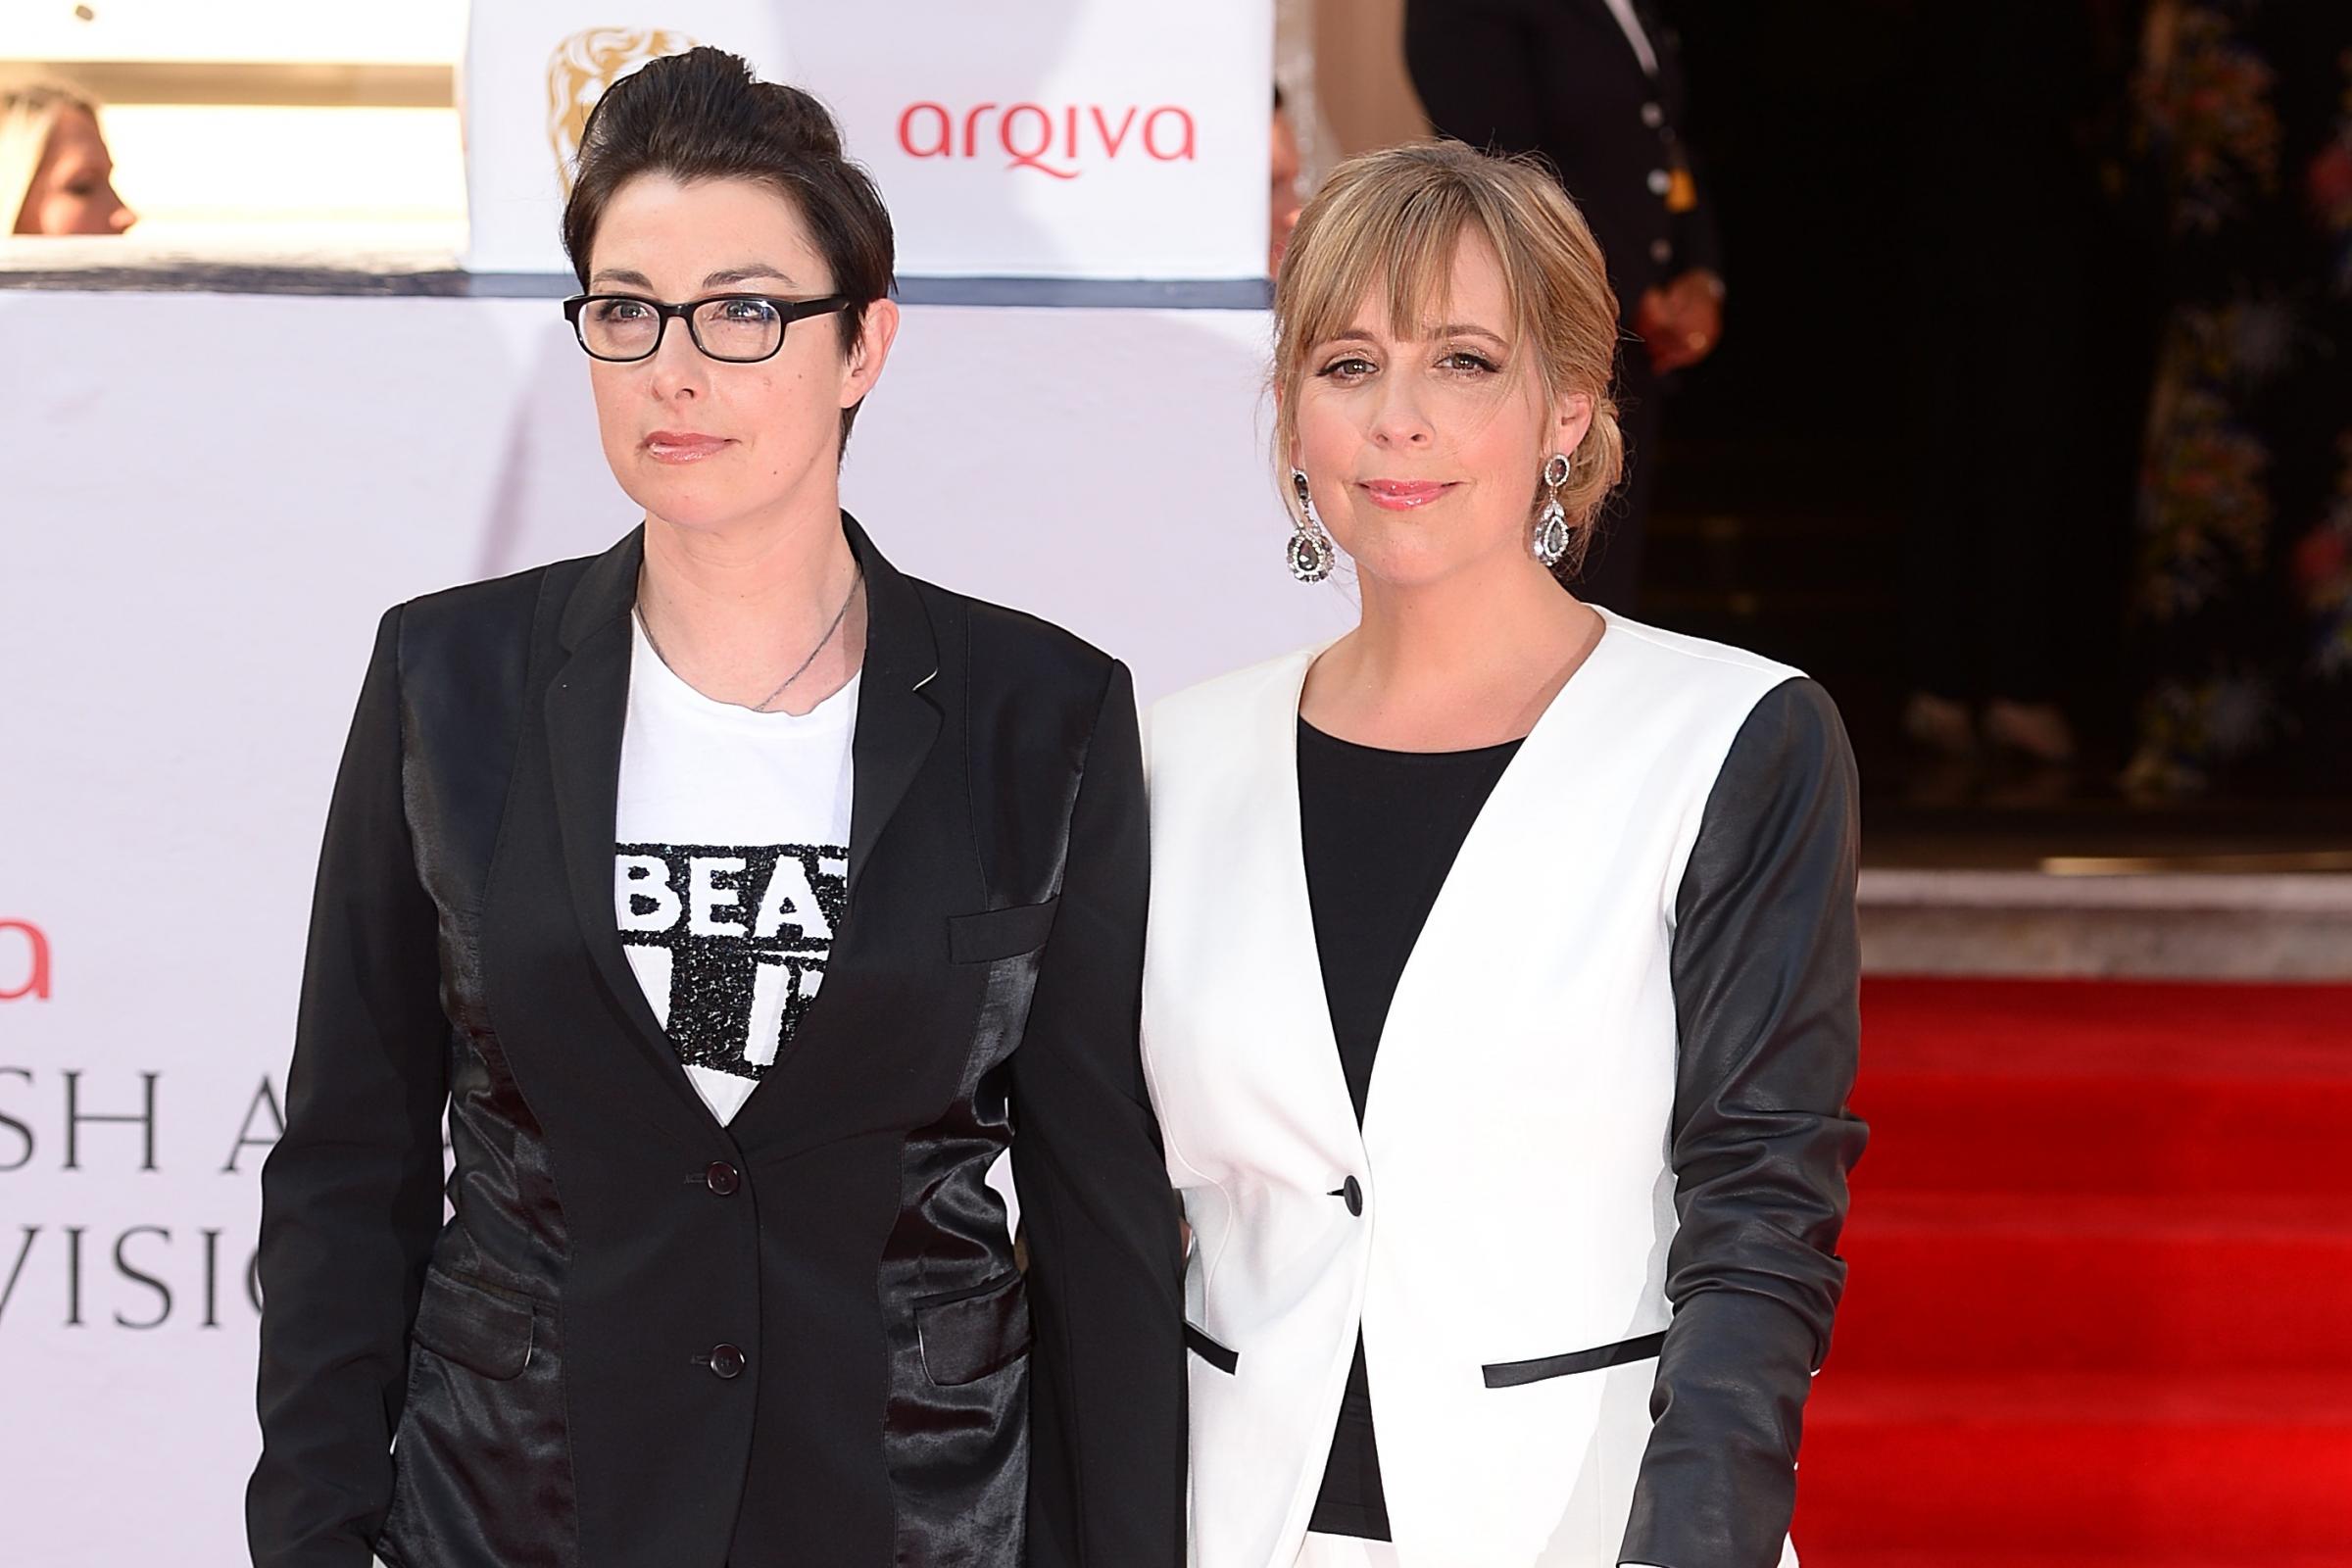 Mel Giedroyc and Sue Perkins reunited in first images from Hitmen comedy